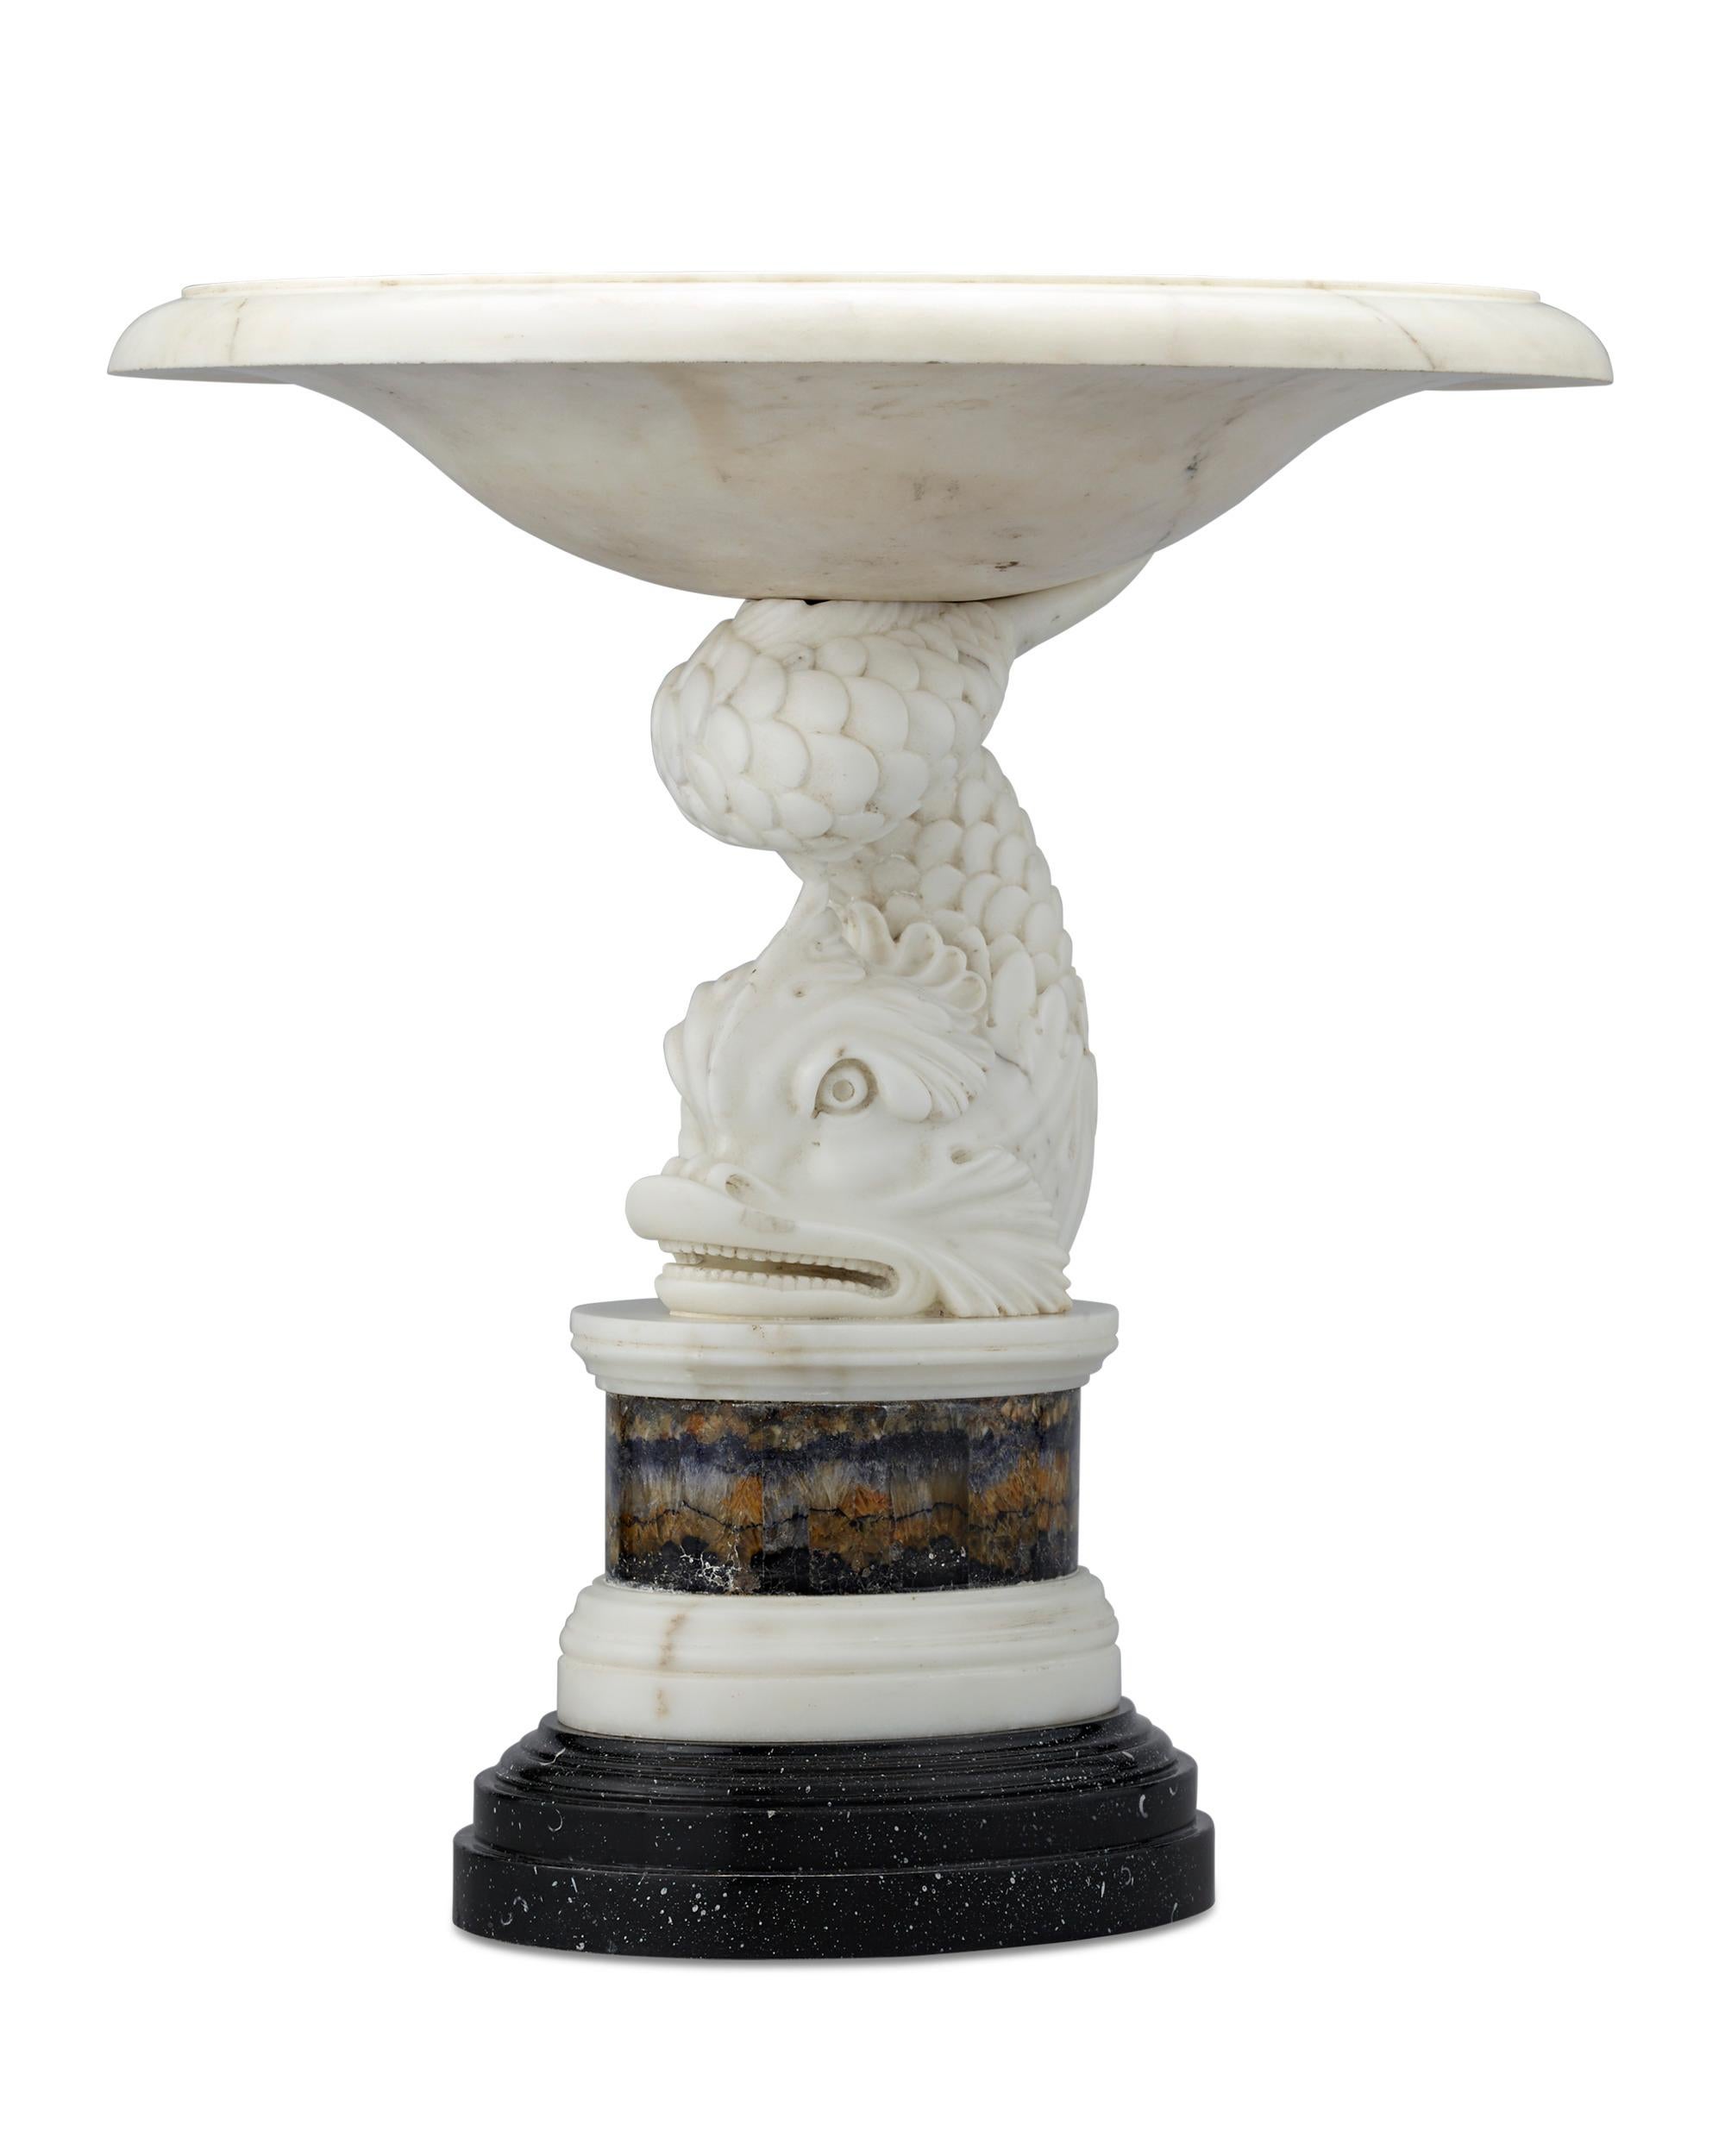 This important George III tazza is attributed to famed Scottish-Swedish architect Sir William Chambers. The magnificent piece features a base carved from statuary marble in the shape of a stylized dolphin, which relates to Chambers extraordinary